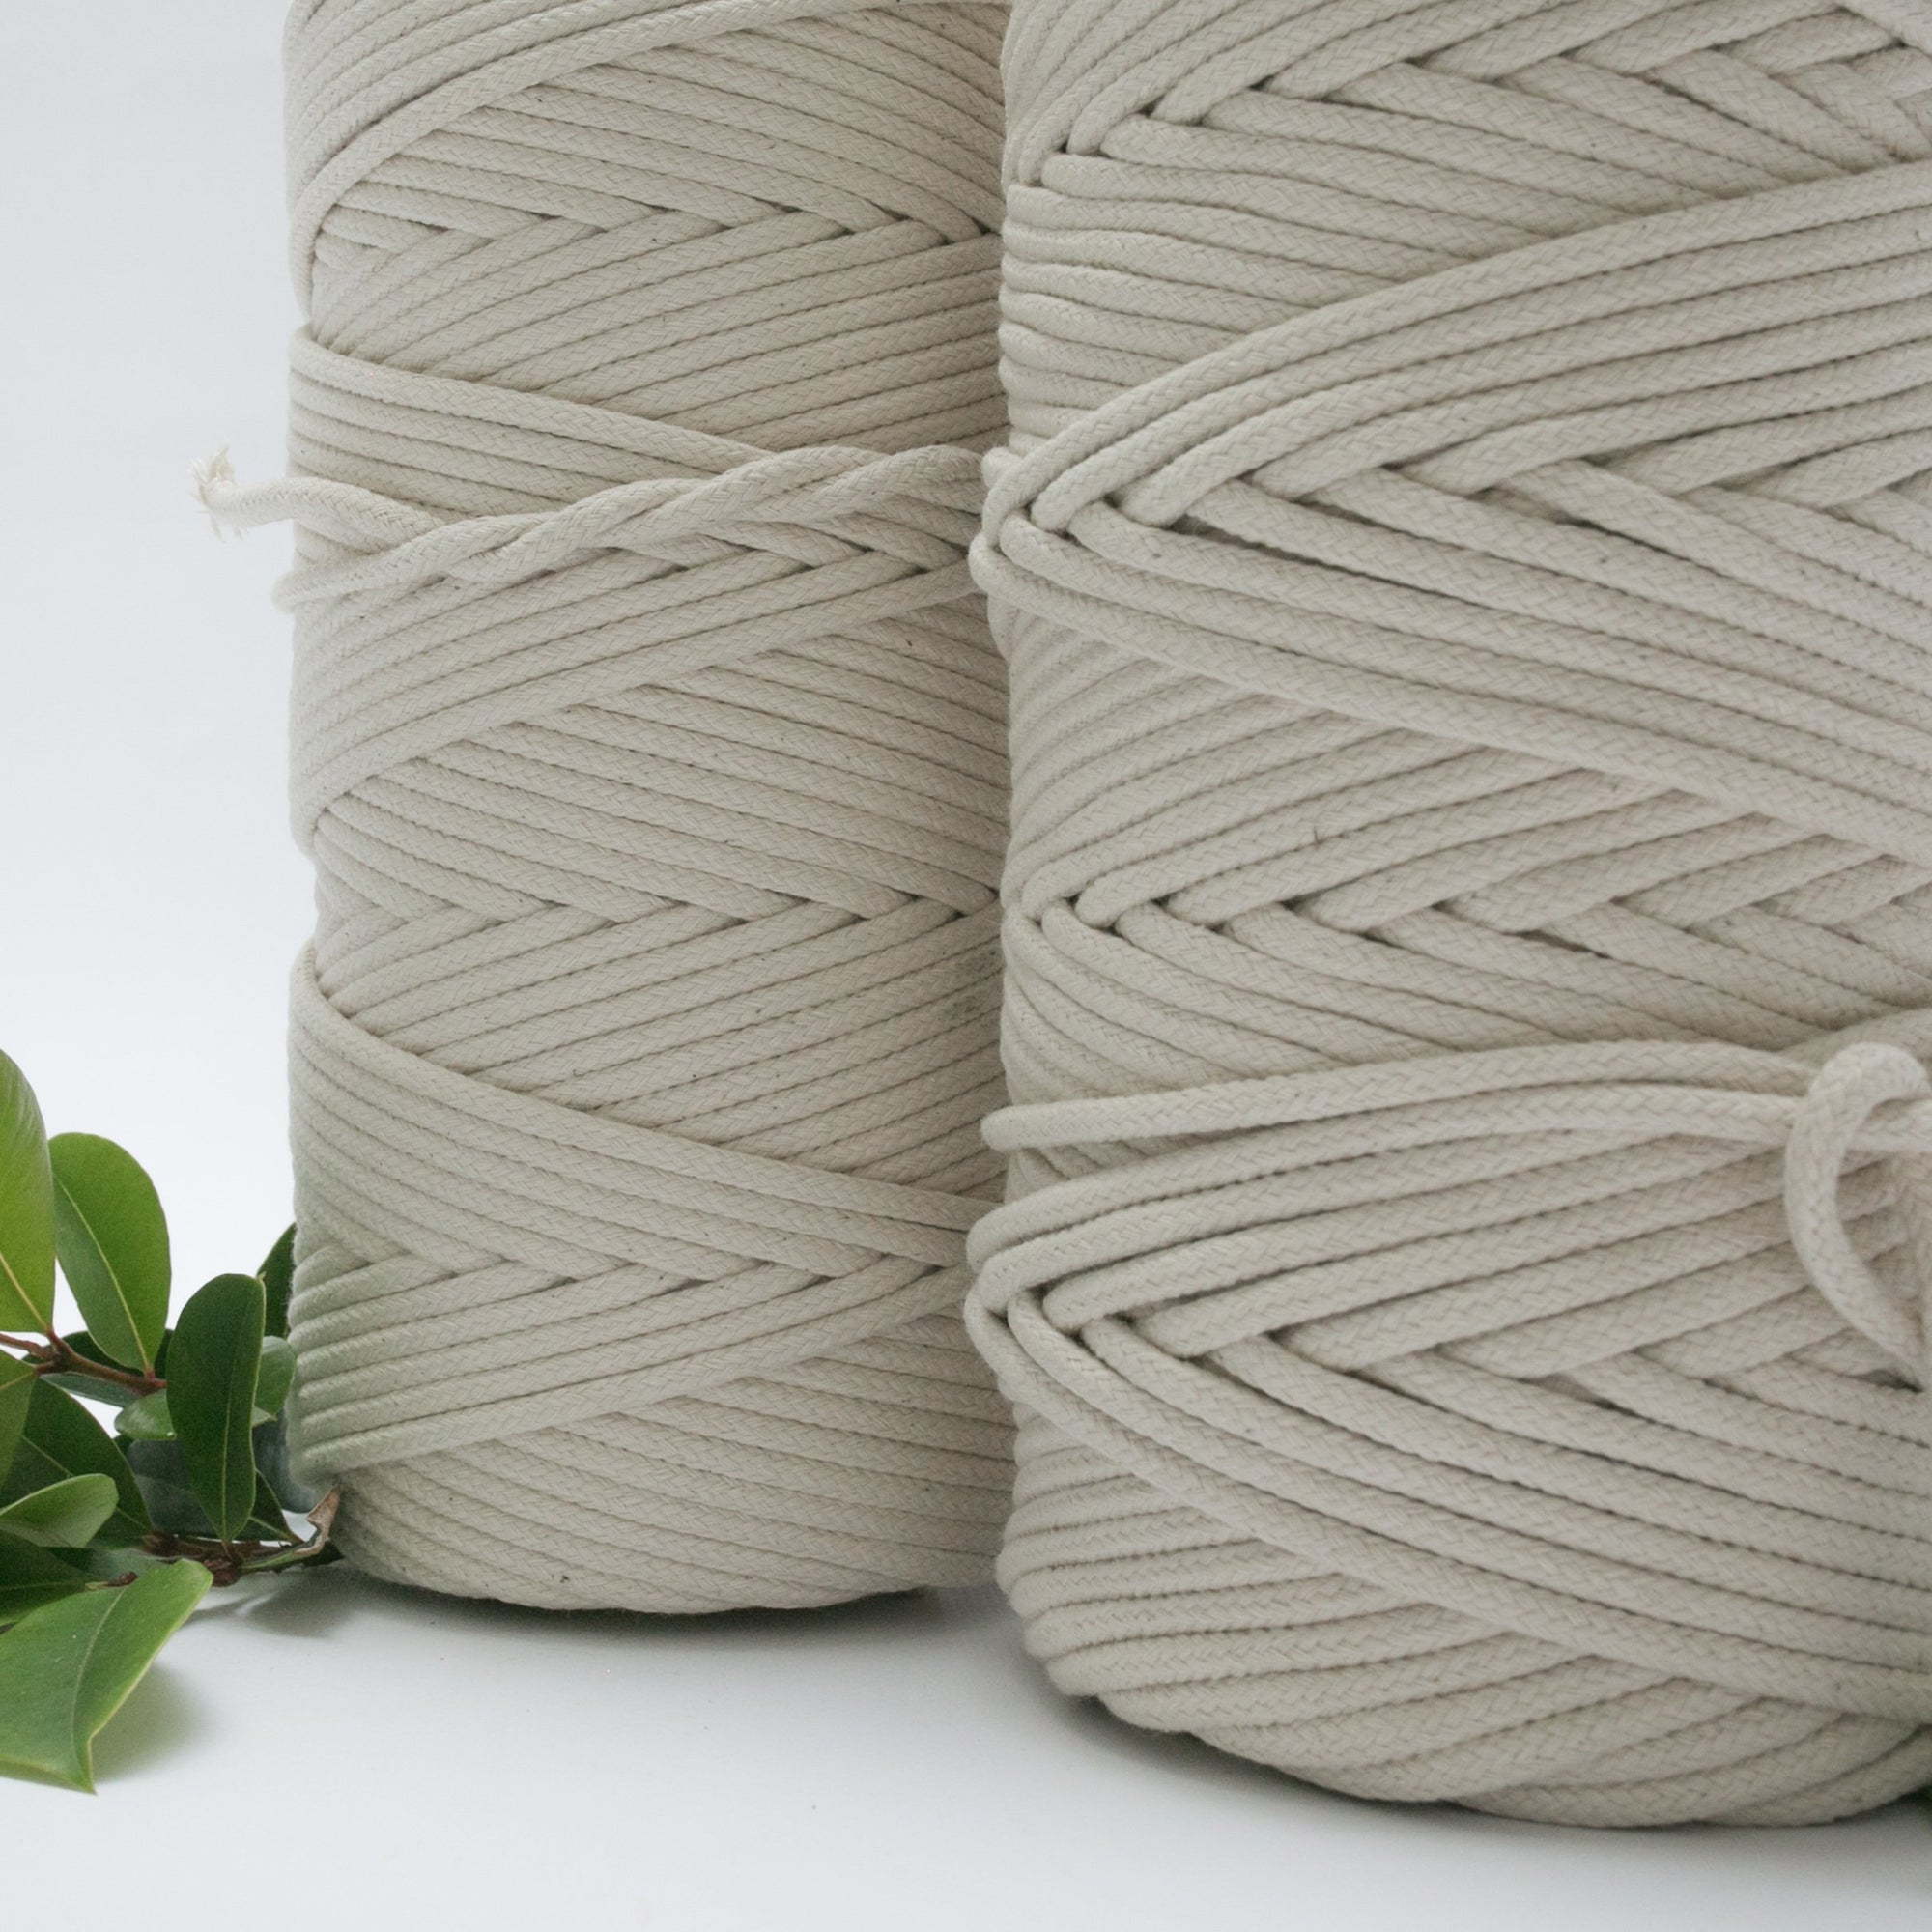 Braided Sash  Buy Natural & Coloured Cotton Cord Today - Mary Maker Studio  - Macrame & Weaving Supplies and Education.